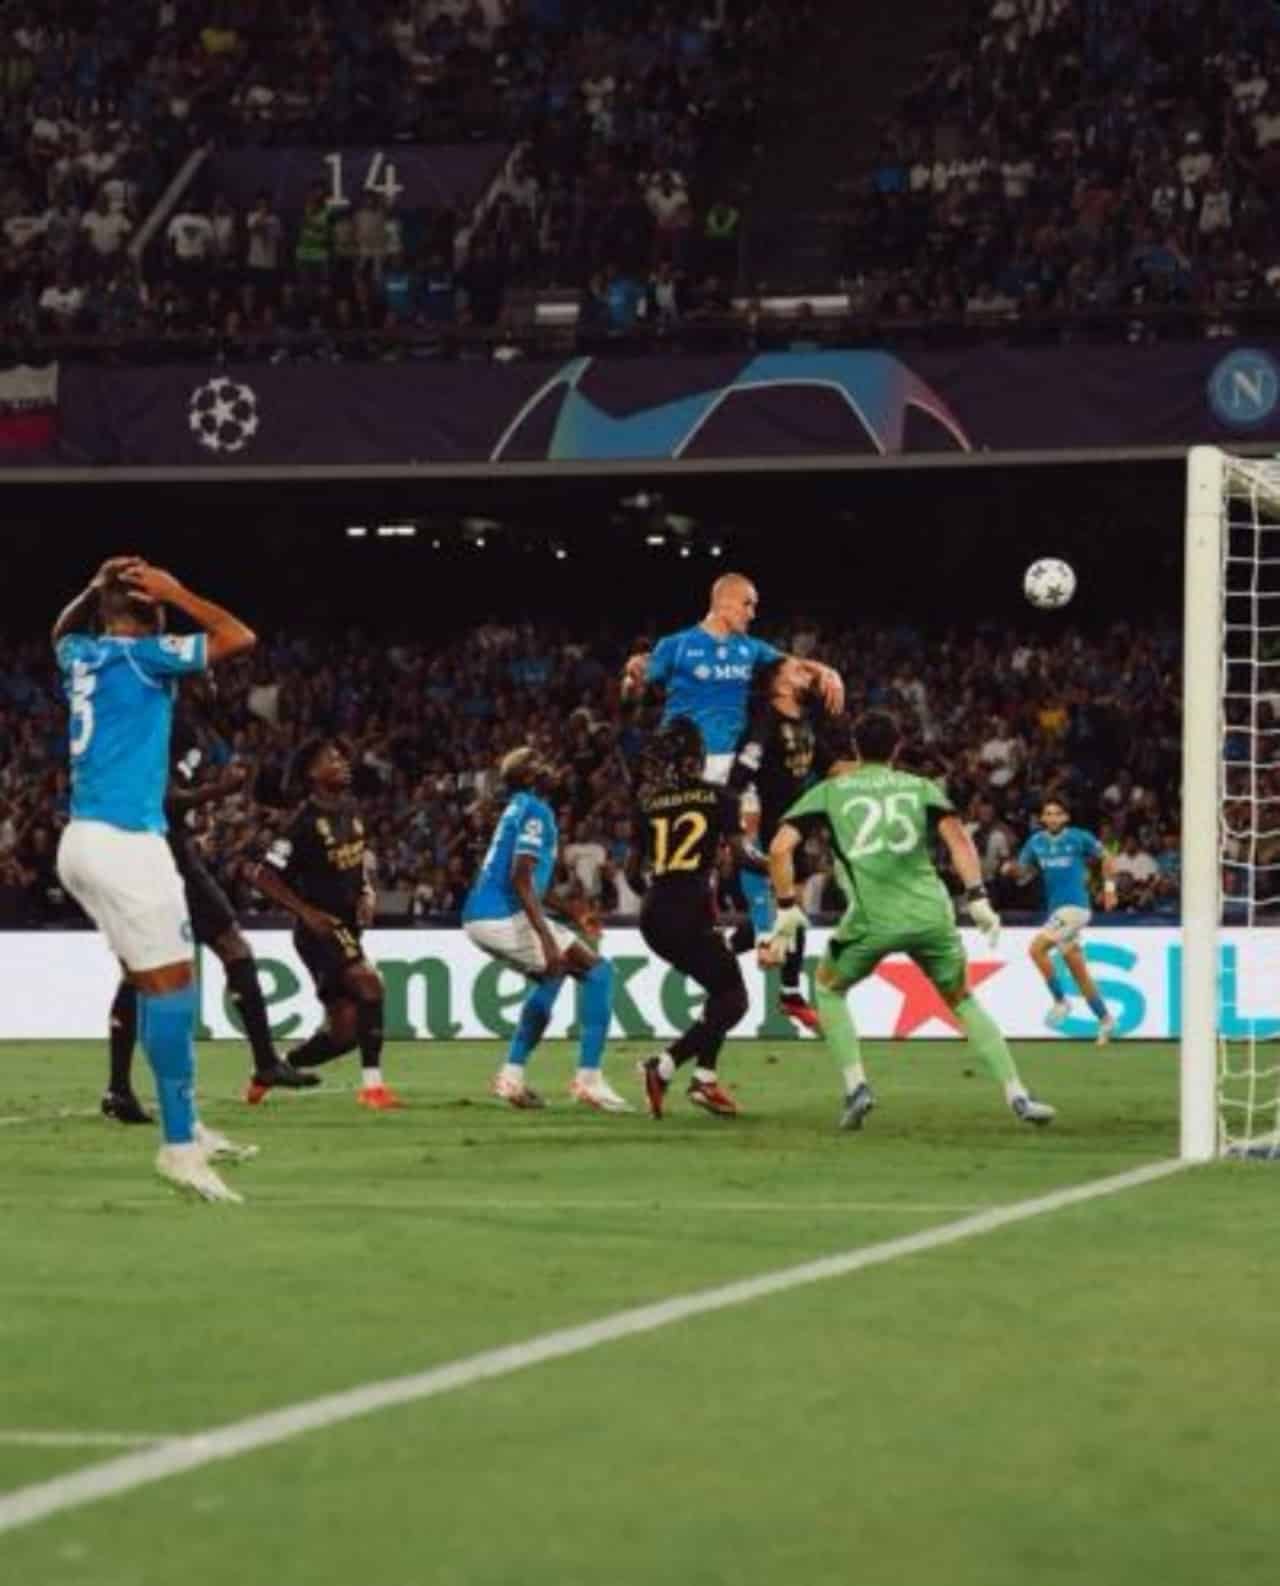 UCL: Napoli boss Garcia blames players after losing 3-2 to Real Madrid